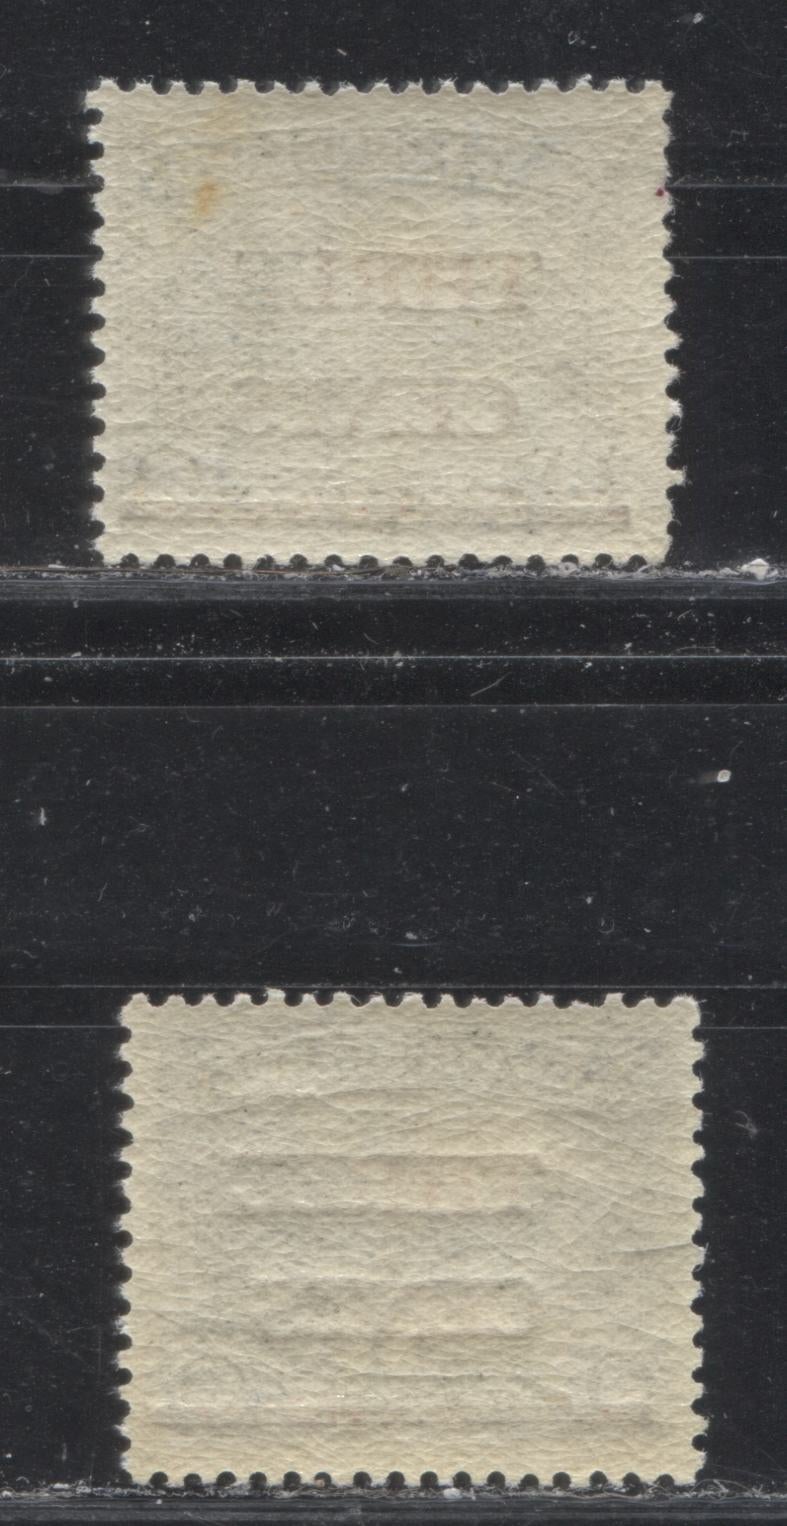 Lot 79 Newfoundland # 160-160iii 3c on 6c  Slate Grey Upper Steadies , 1929 Surcharged Pictorial Issue, Two VFOG an VFNH Examples, Both Types of Surcharge, Comb Perf. 14.1 x 13.9